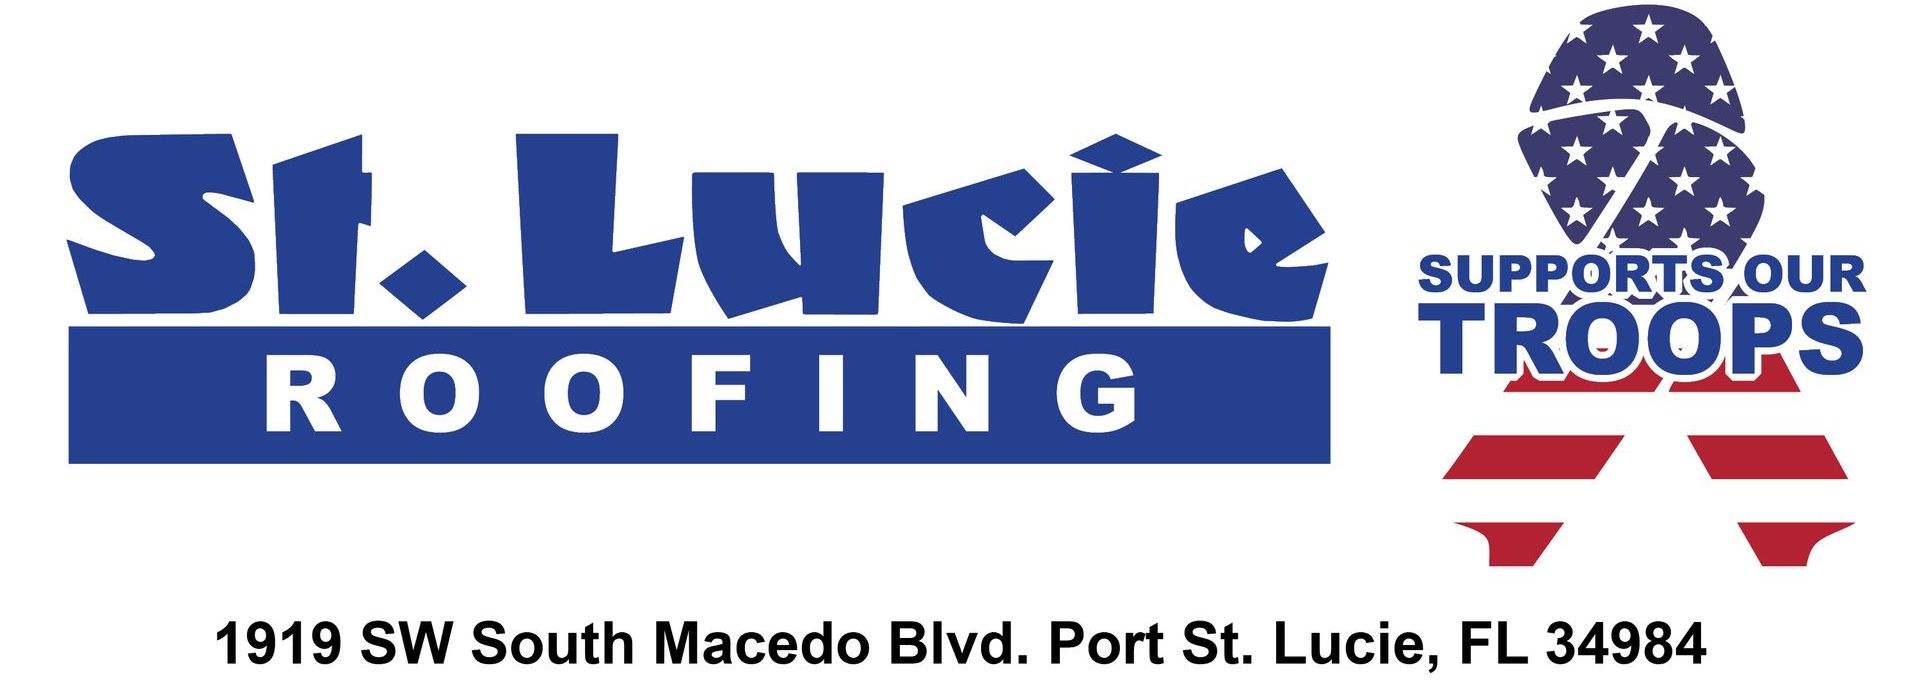 St. Lucie Roofing logo